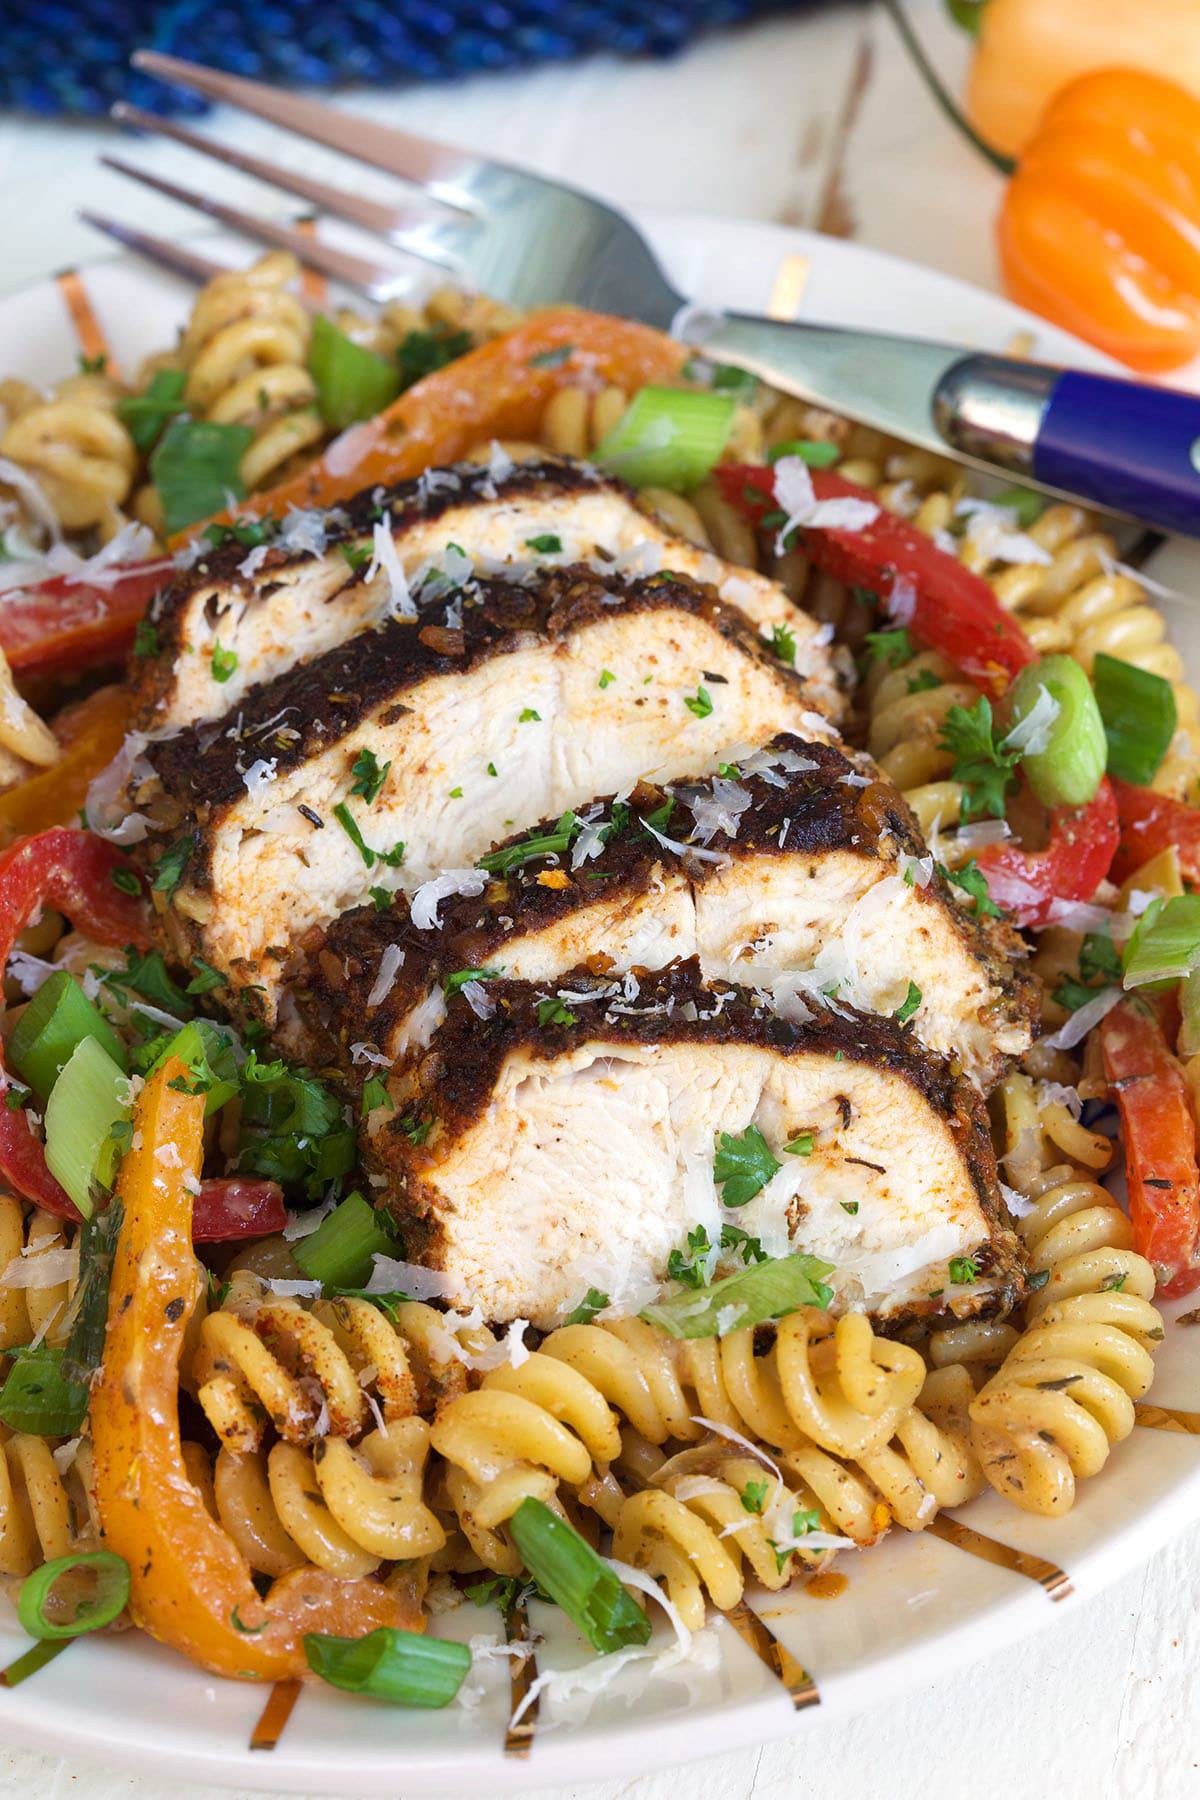 Chicken is sliced and placed on top of pasta.